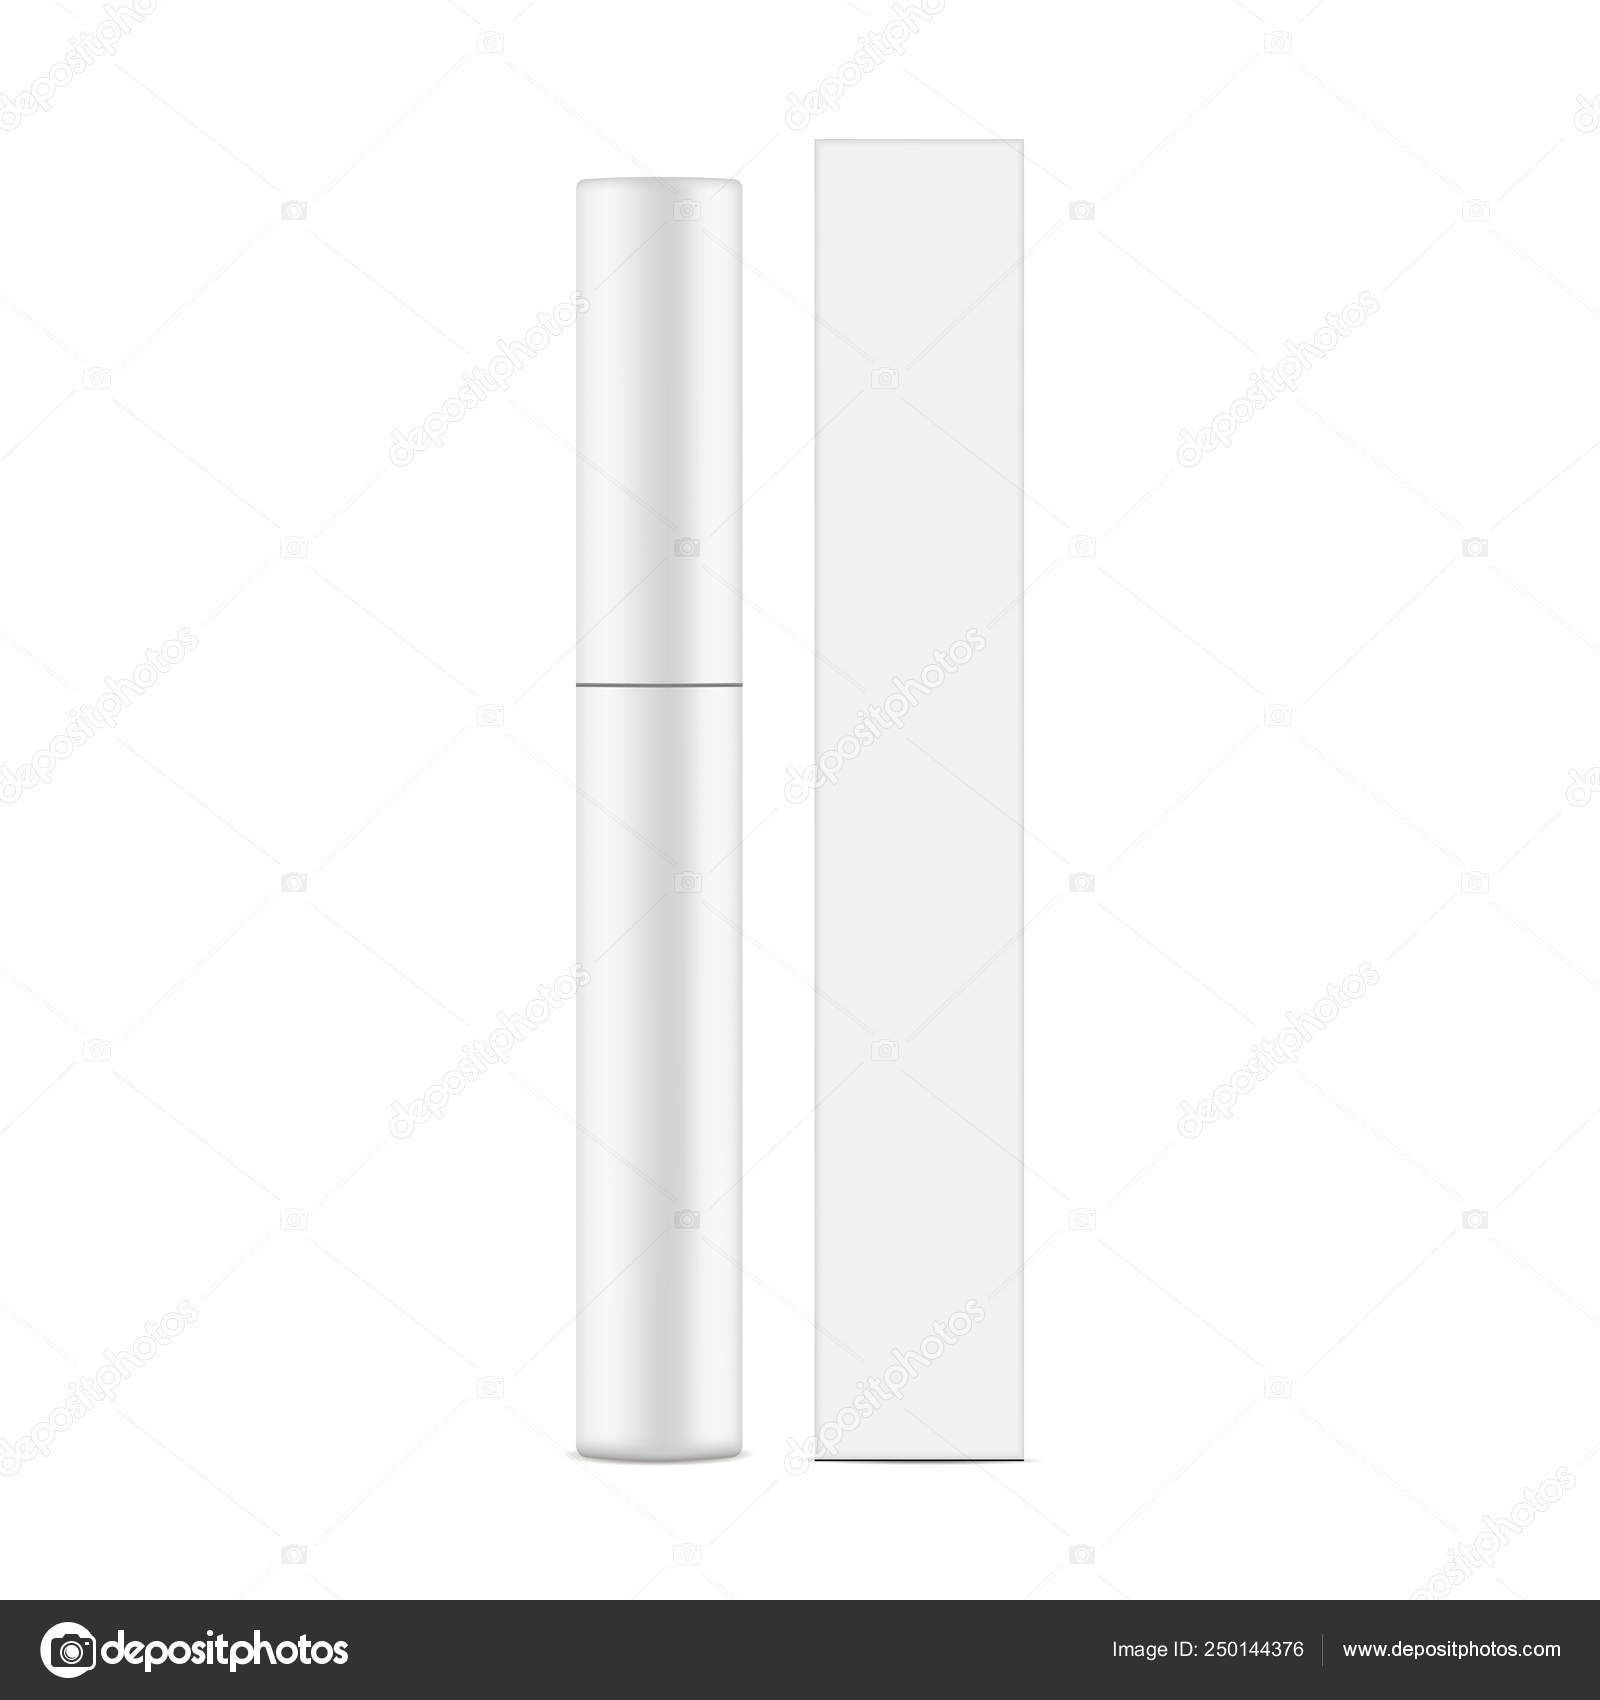 Download Eyeliner Tube With Box Mockup Front View Vector Image By C Evgeniyzimin Vector Stock 250144376